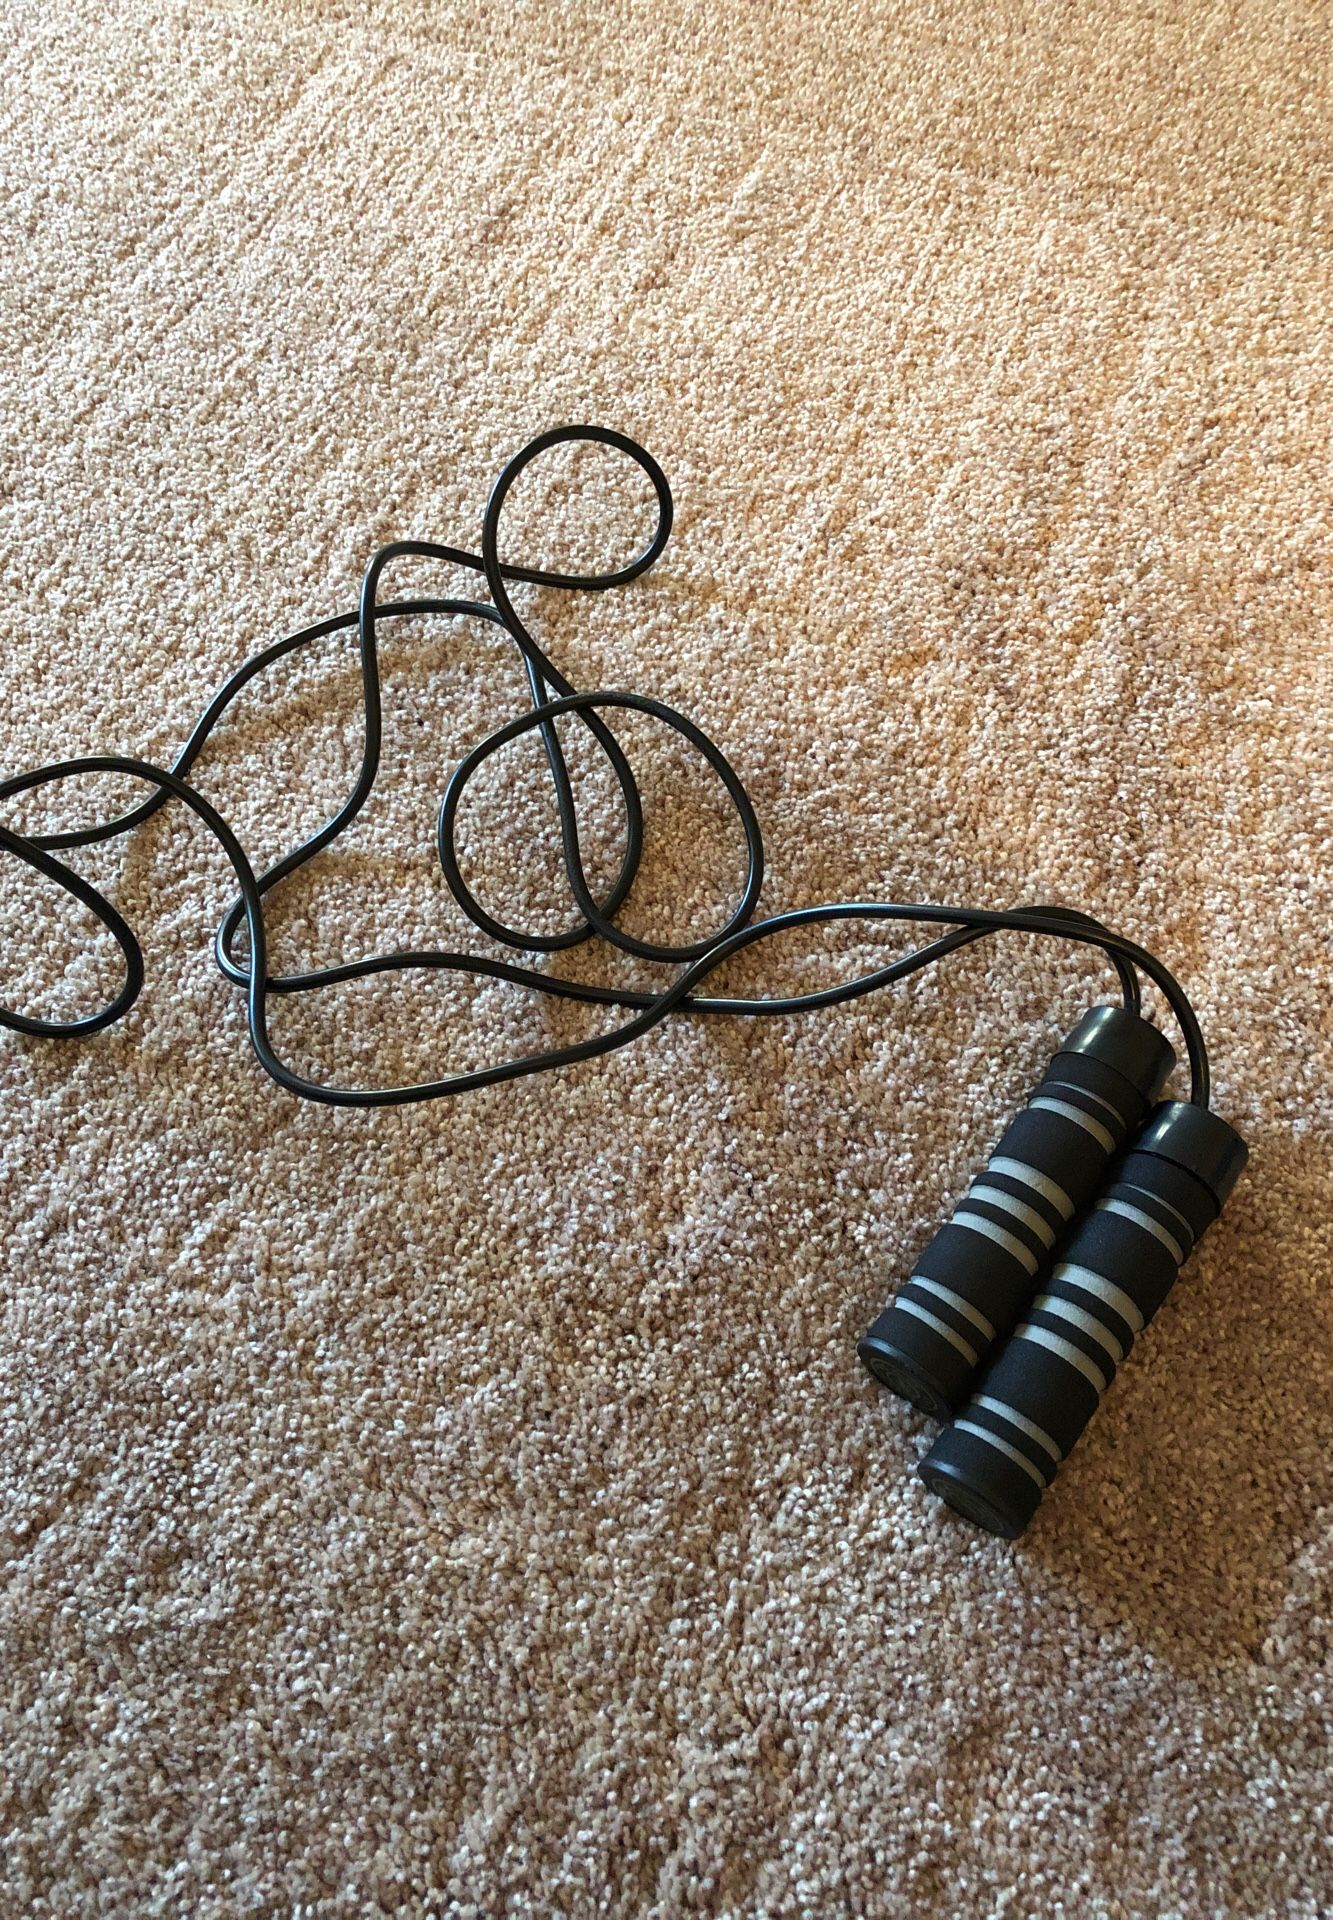 Weighted jumping rope